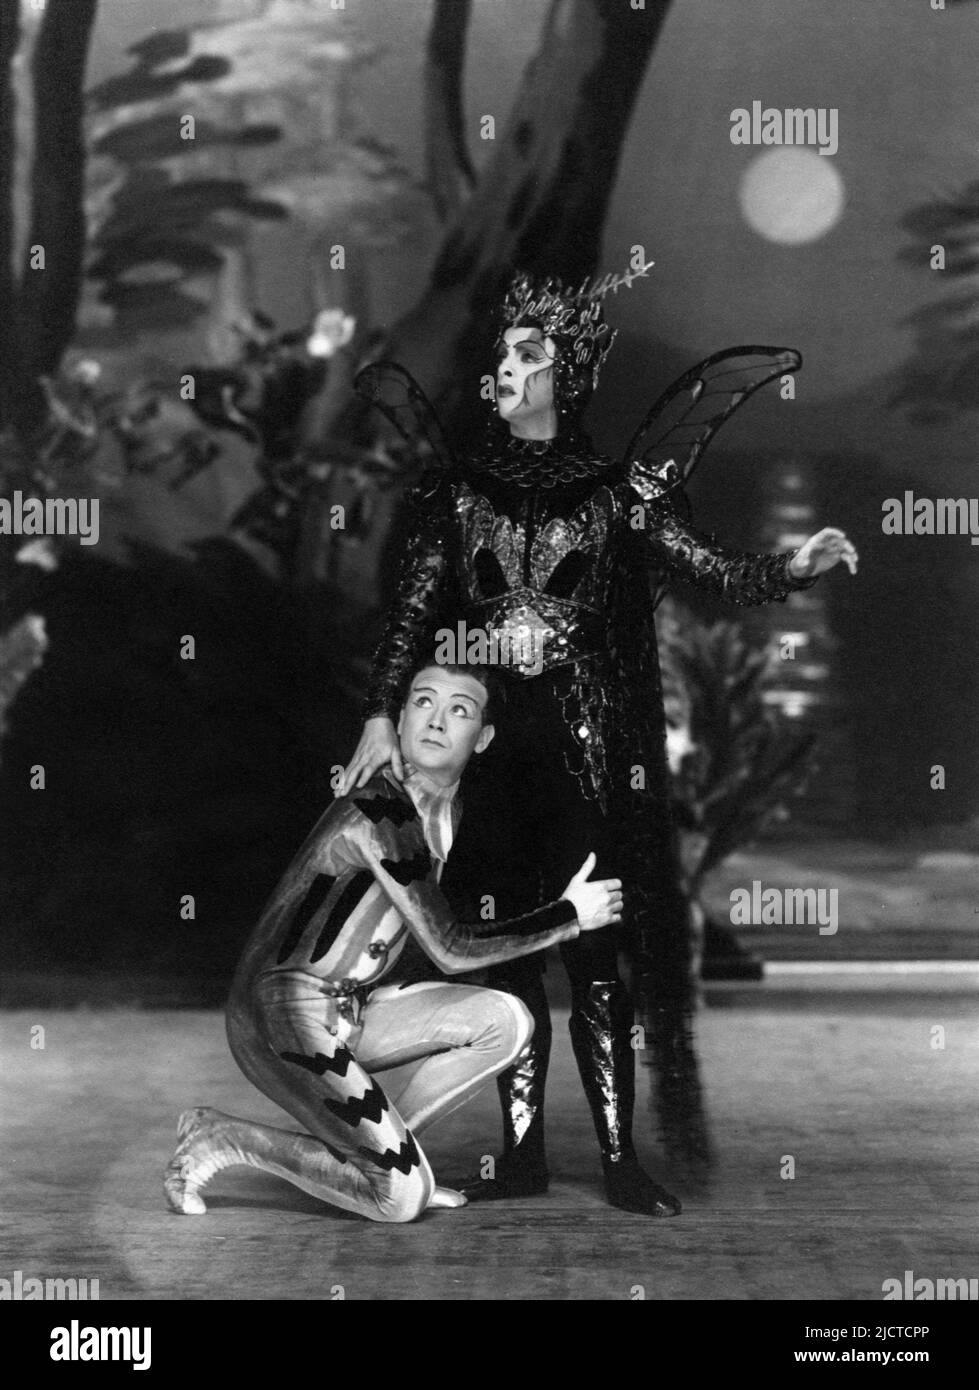 JOHN MILLS and ROBERT HELPMANN as Oberon King of the Fairies in photo by J.W. DEBENHAM in A MIDSUMMER NIGHT'S DREAM 1937 play by William Shakespeare directed by TYRONE GUTHRIE at the Old Vic Theatre in Waterloo, London Stock Photo